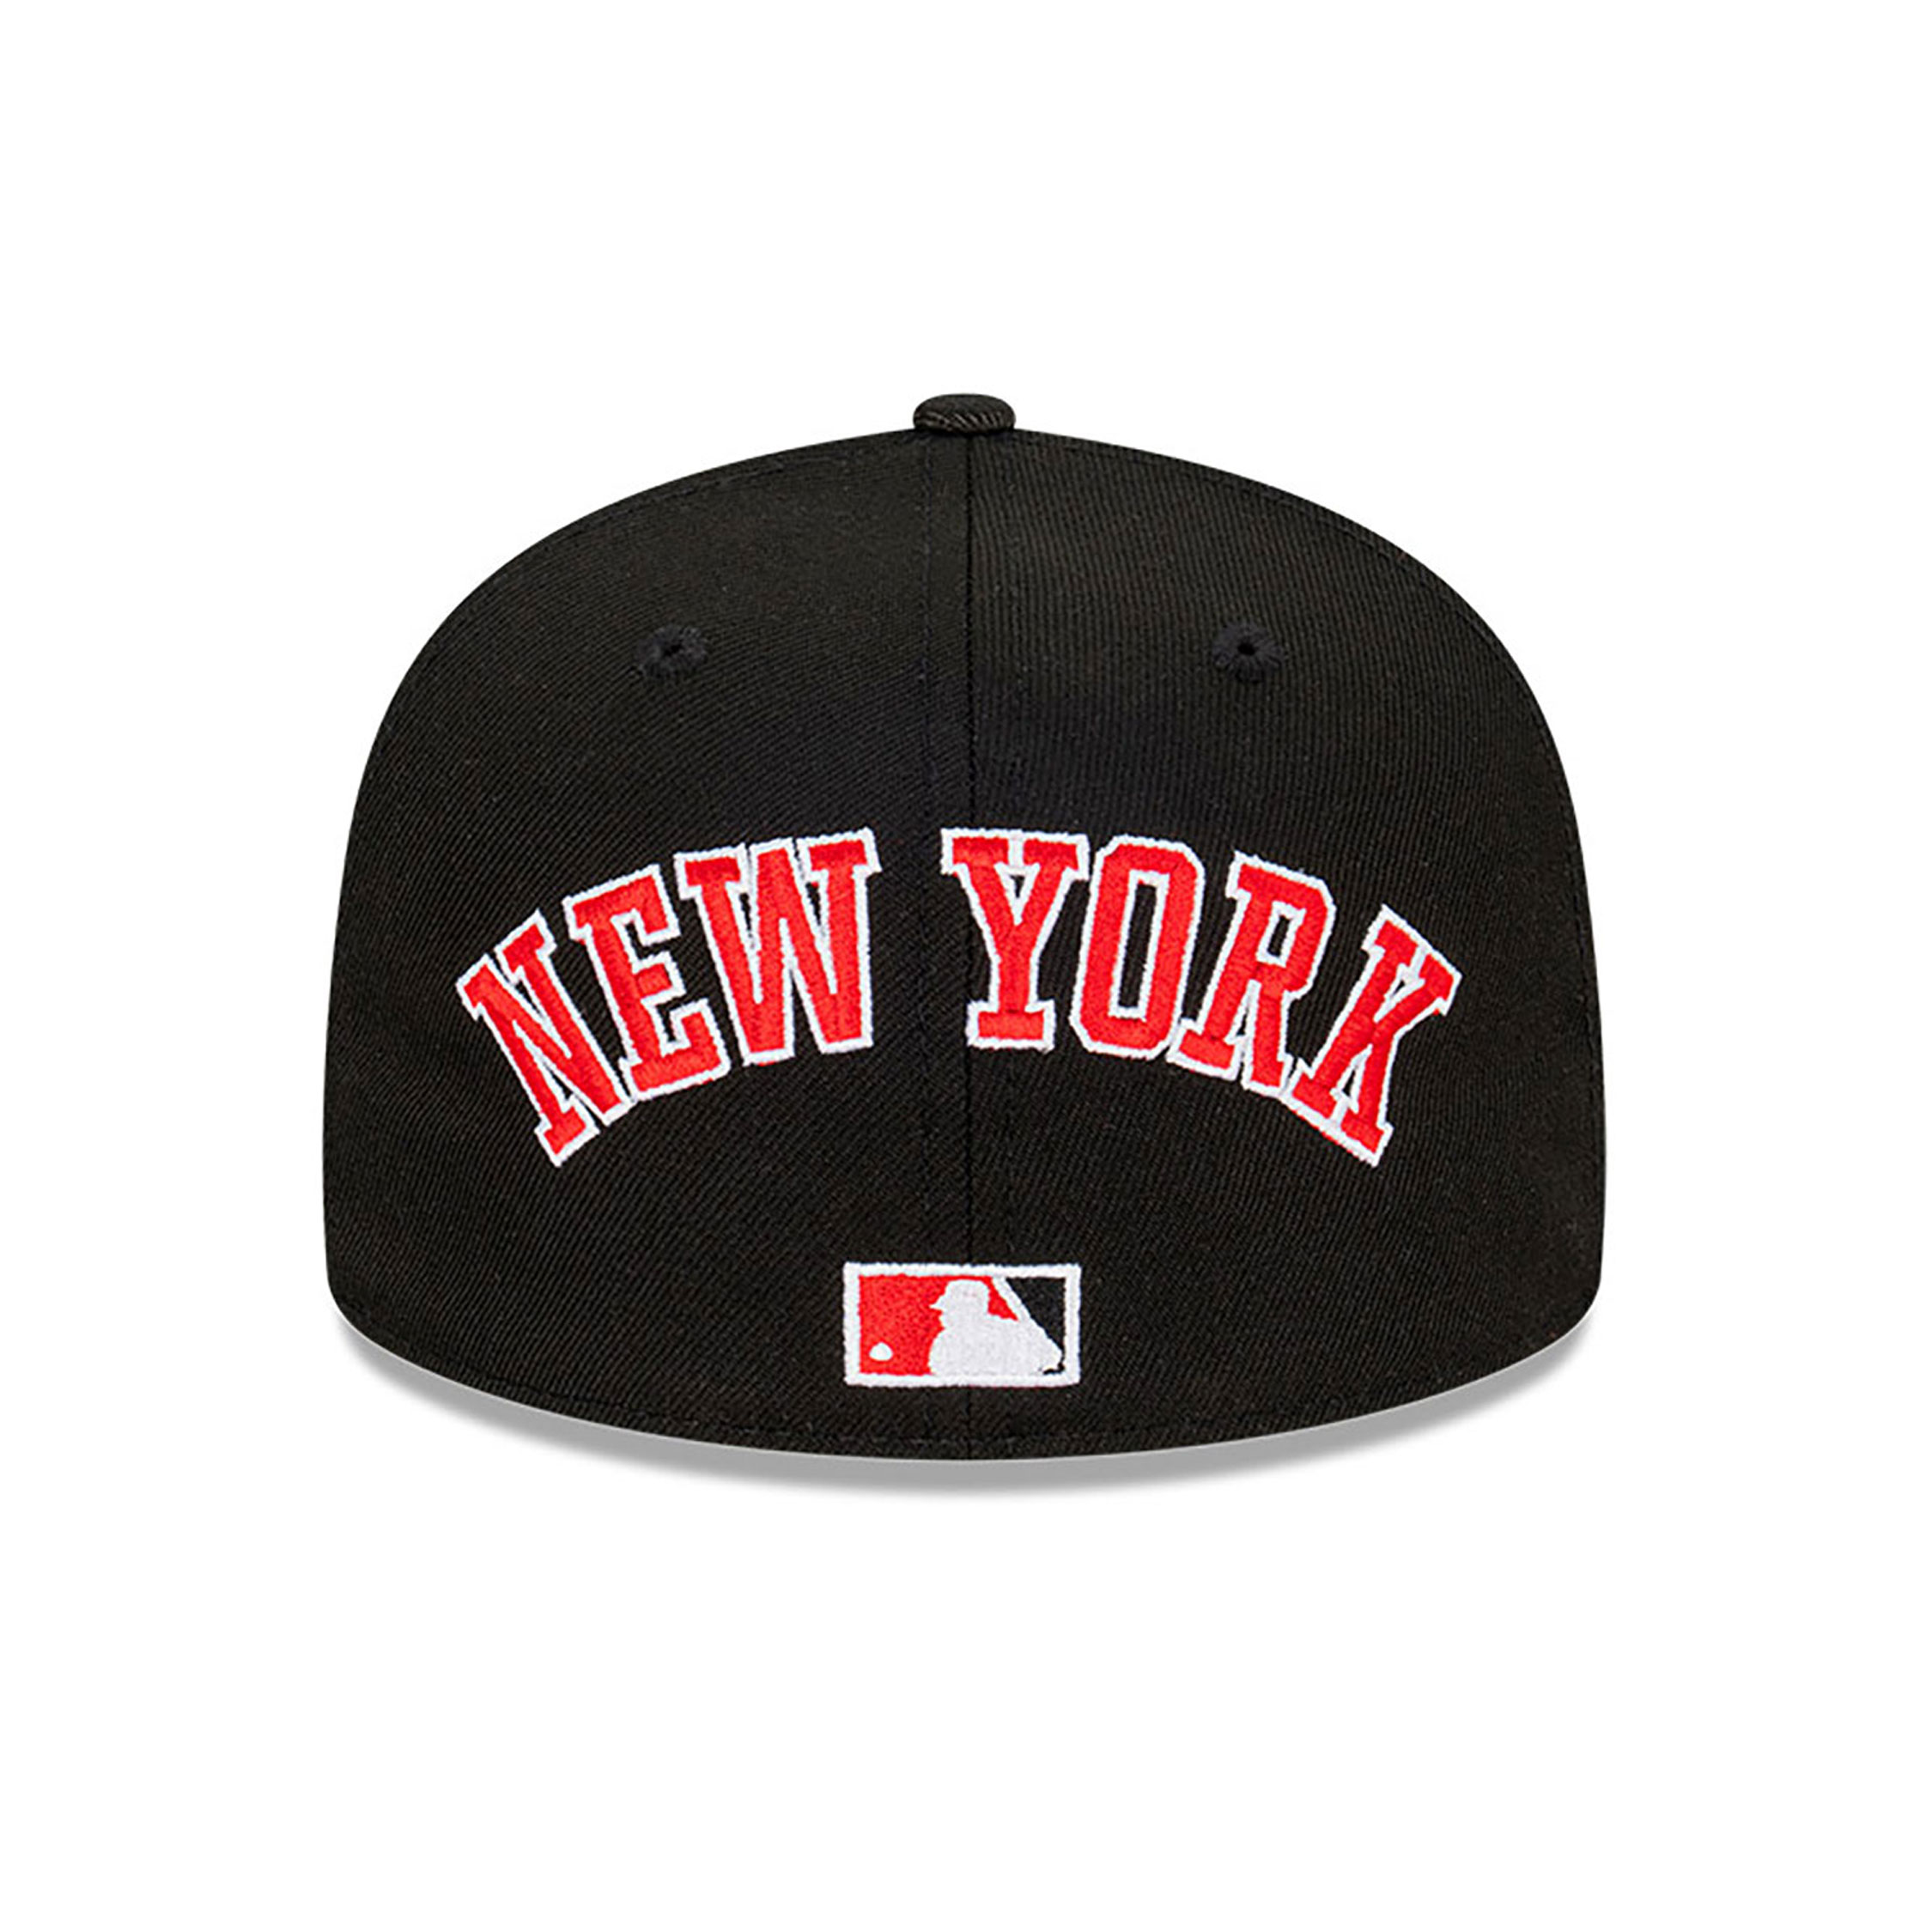 New York Yankees NYC Black 59FIFTY Fitted Cap